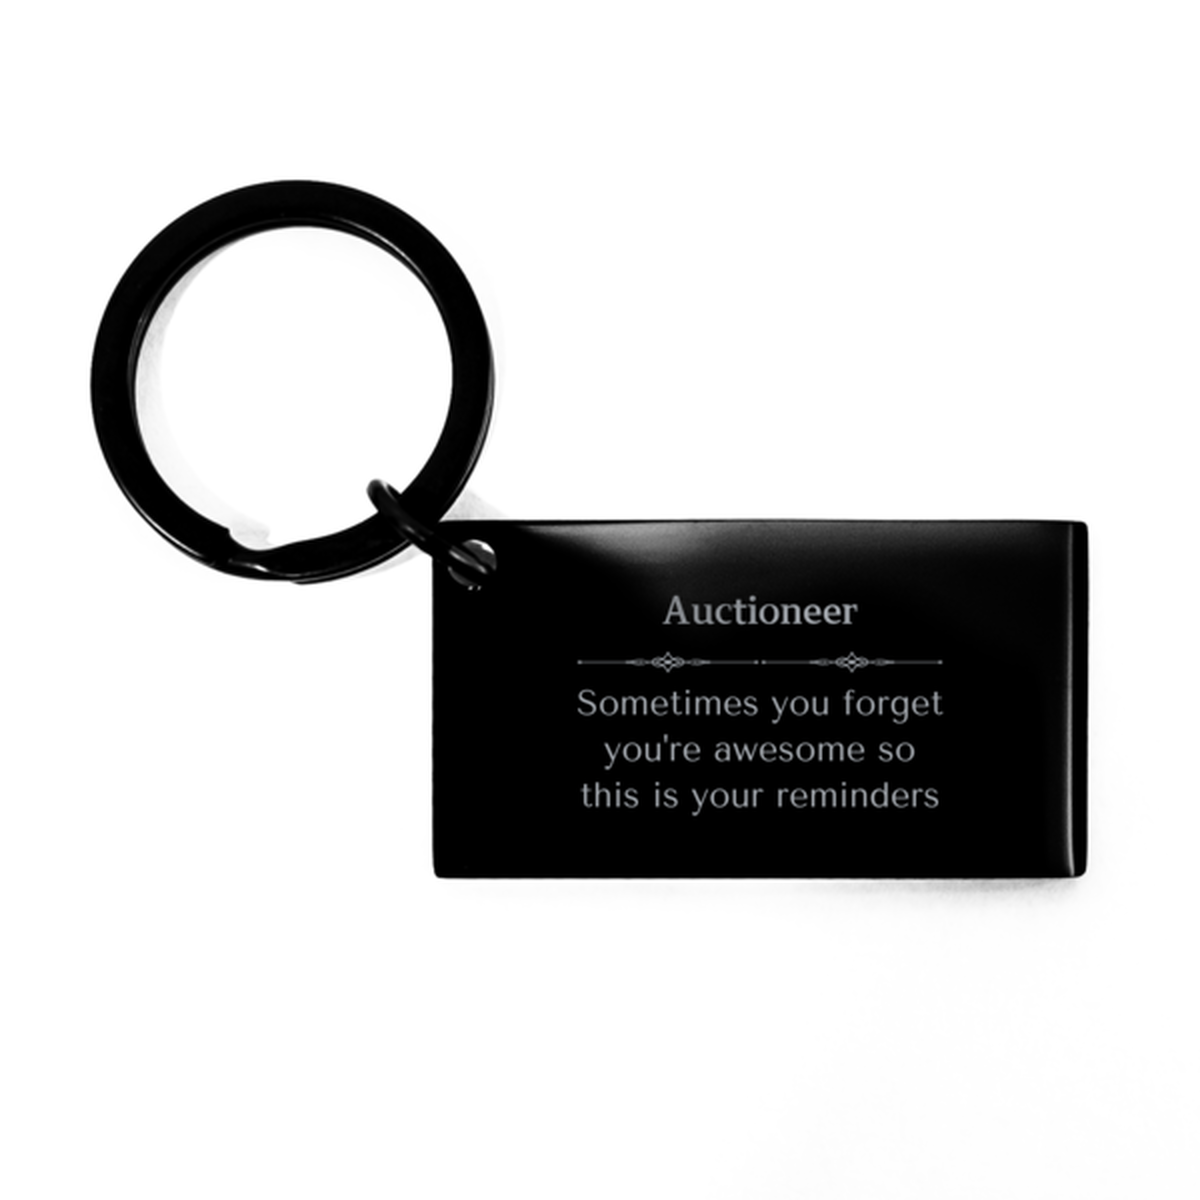 Sentimental Auctioneer Keychain, Correctional Officer Sometimes you forget you're awesome so this is your reminders, Graduation Christmas Birthday Gifts for Auctioneer, Men, Women, Coworkers